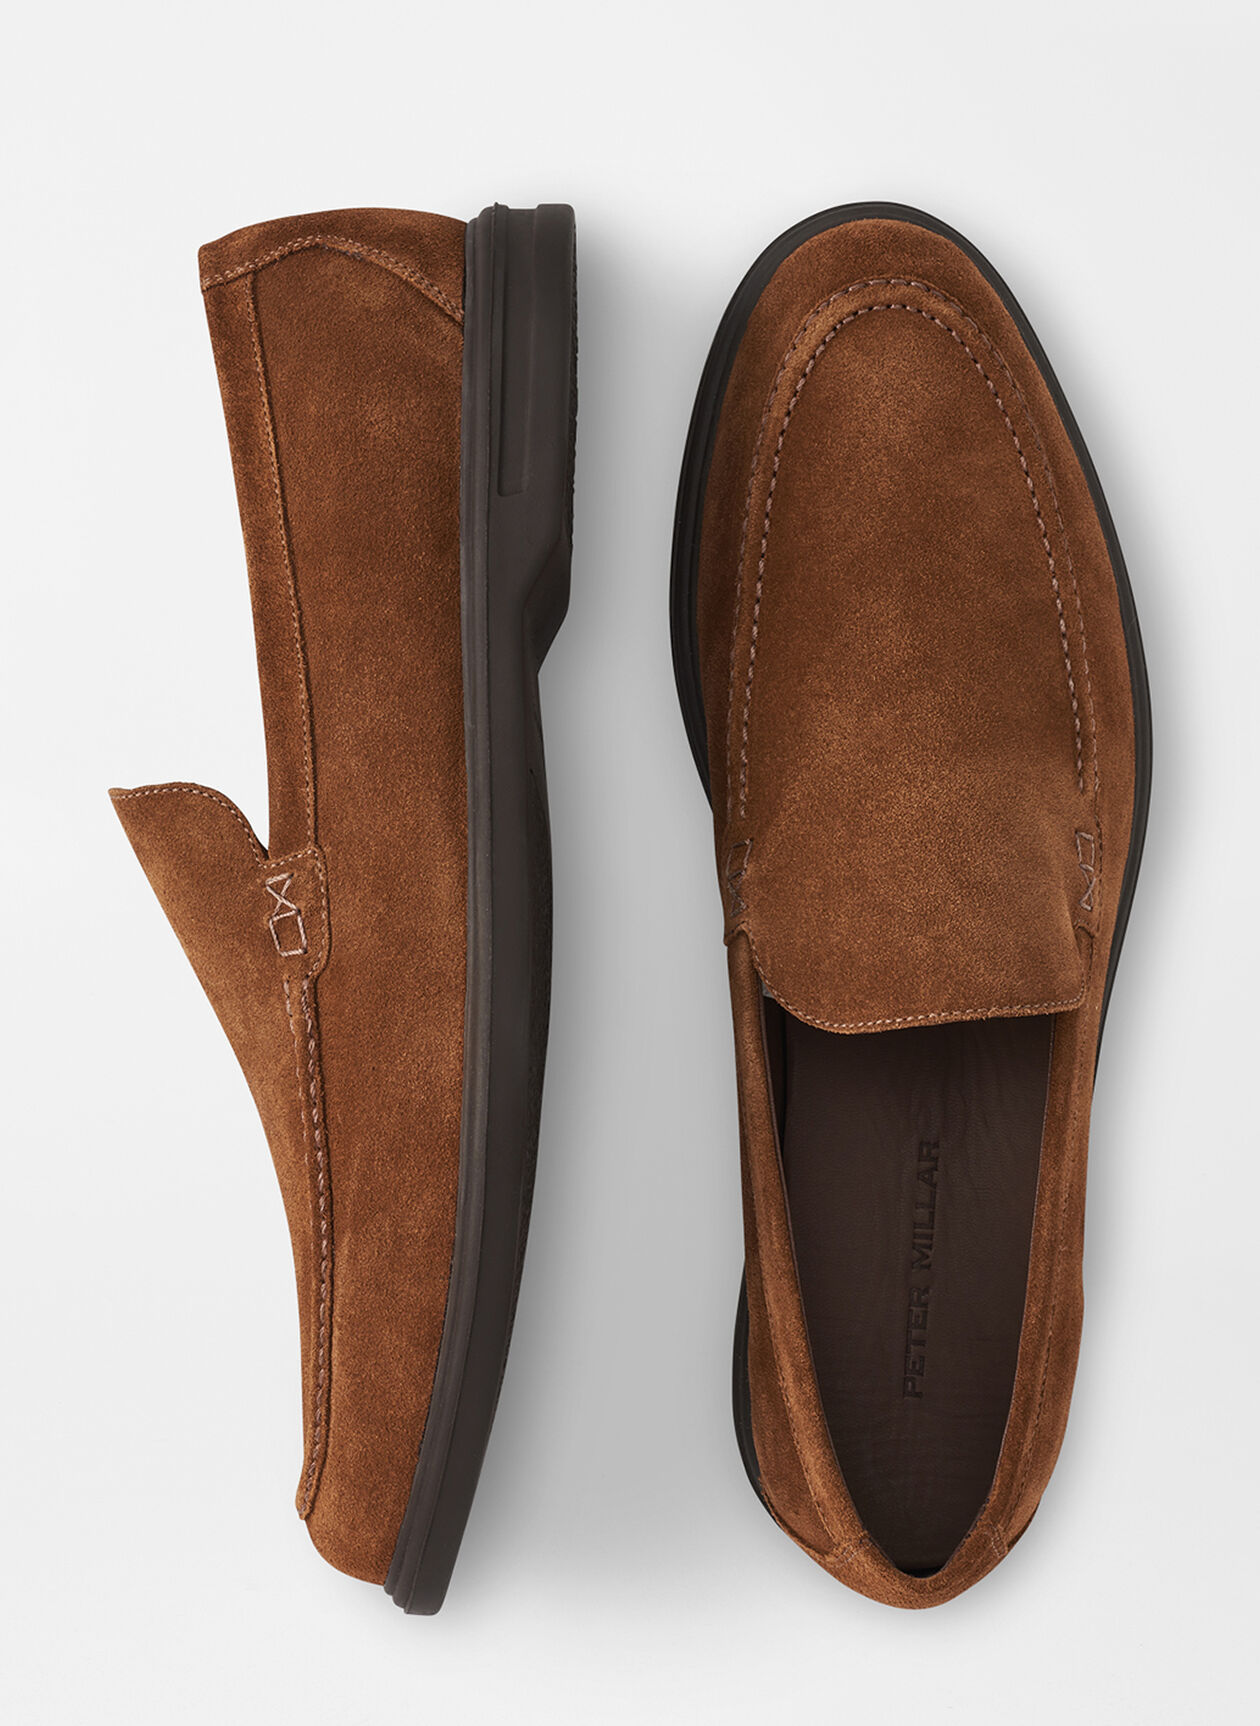 15 Best Men's Loafers for Every Type of Trip